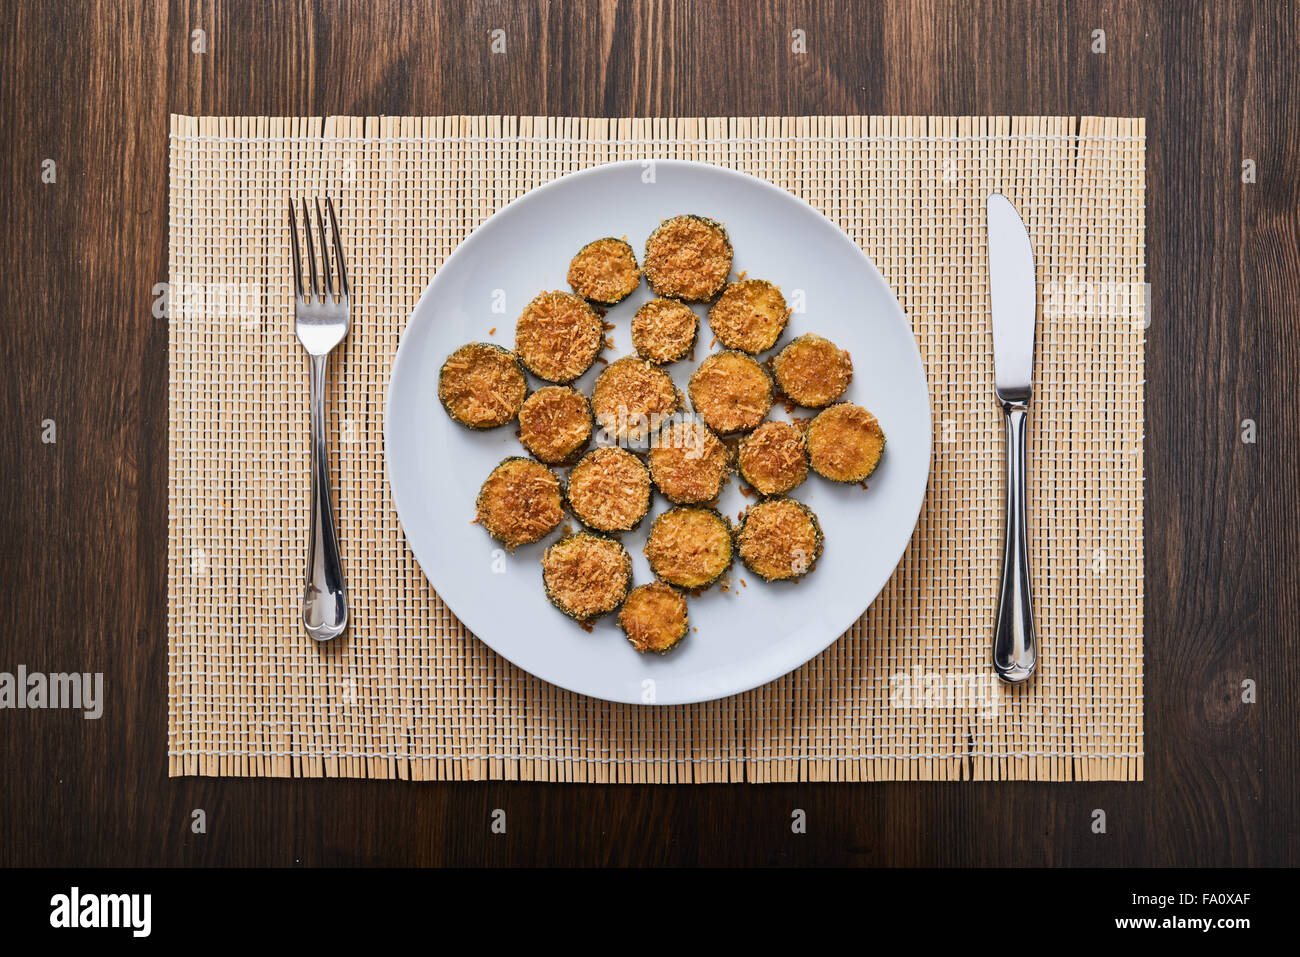 baked zucchini parmesan on white plate Stock Photo